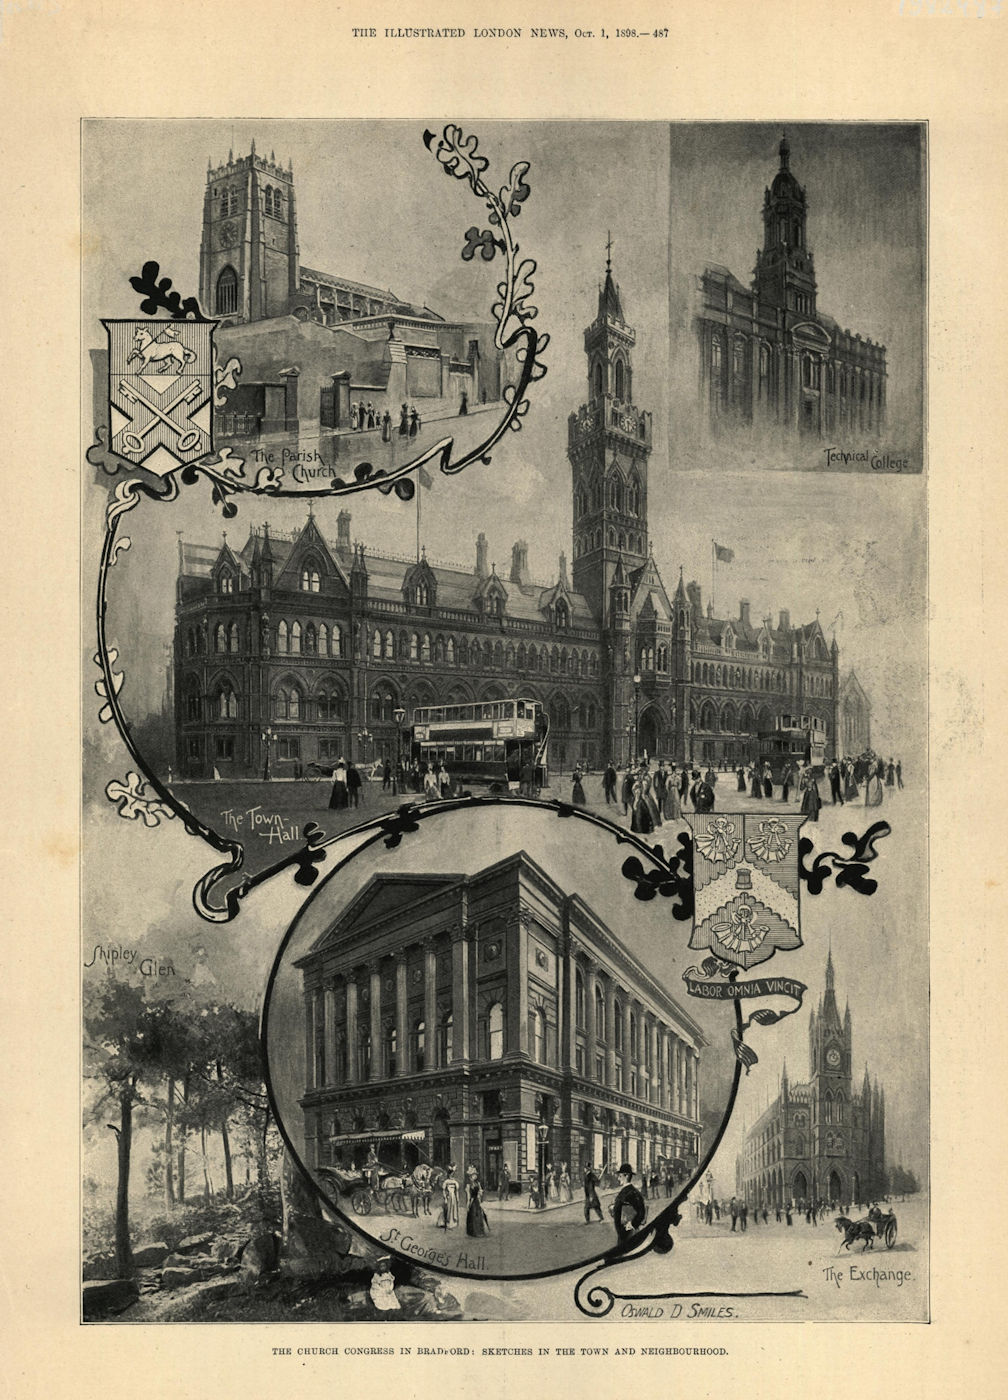 Bradford: Sketches in the town & neighbourhood. Yorkshire 1898 old print